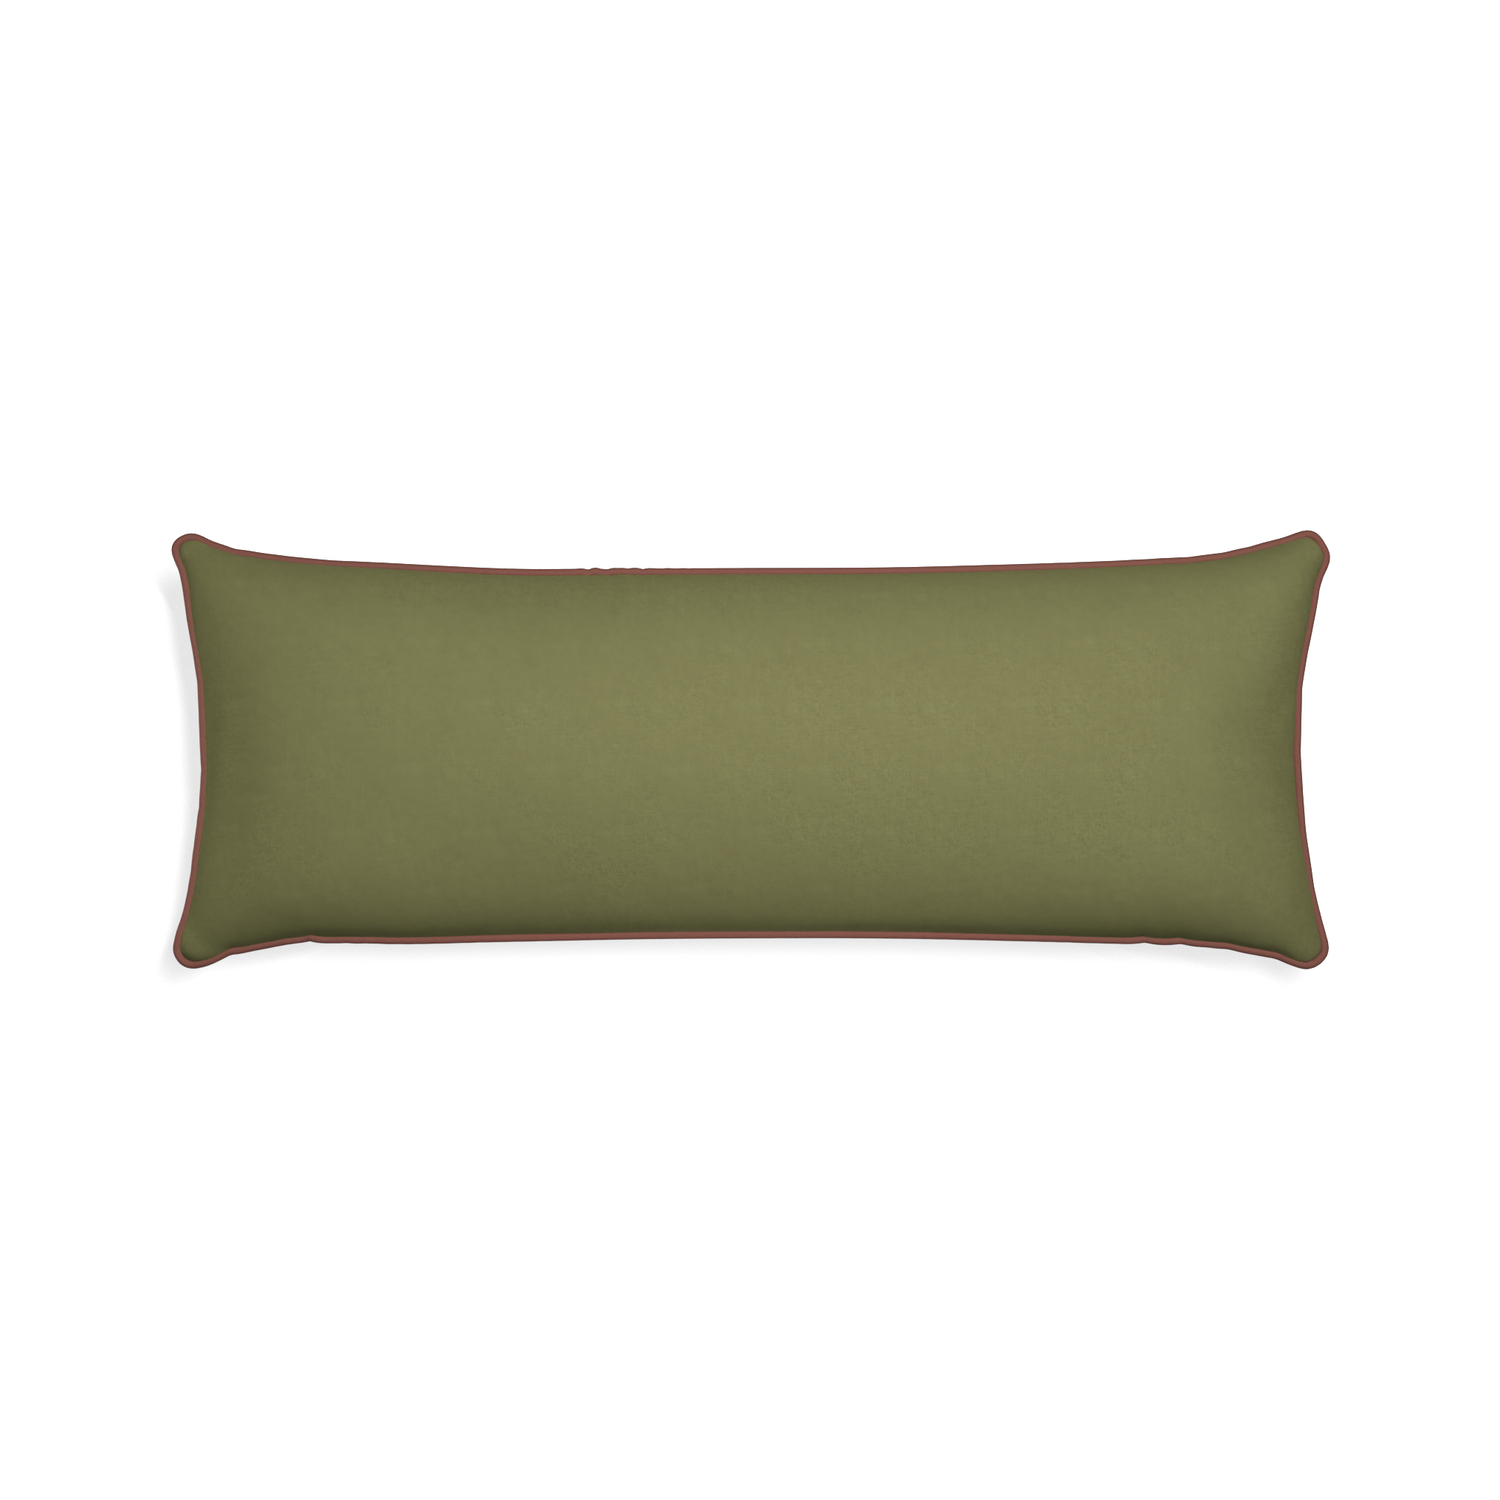 Xl-lumbar moss custom moss greenpillow with w piping on white background